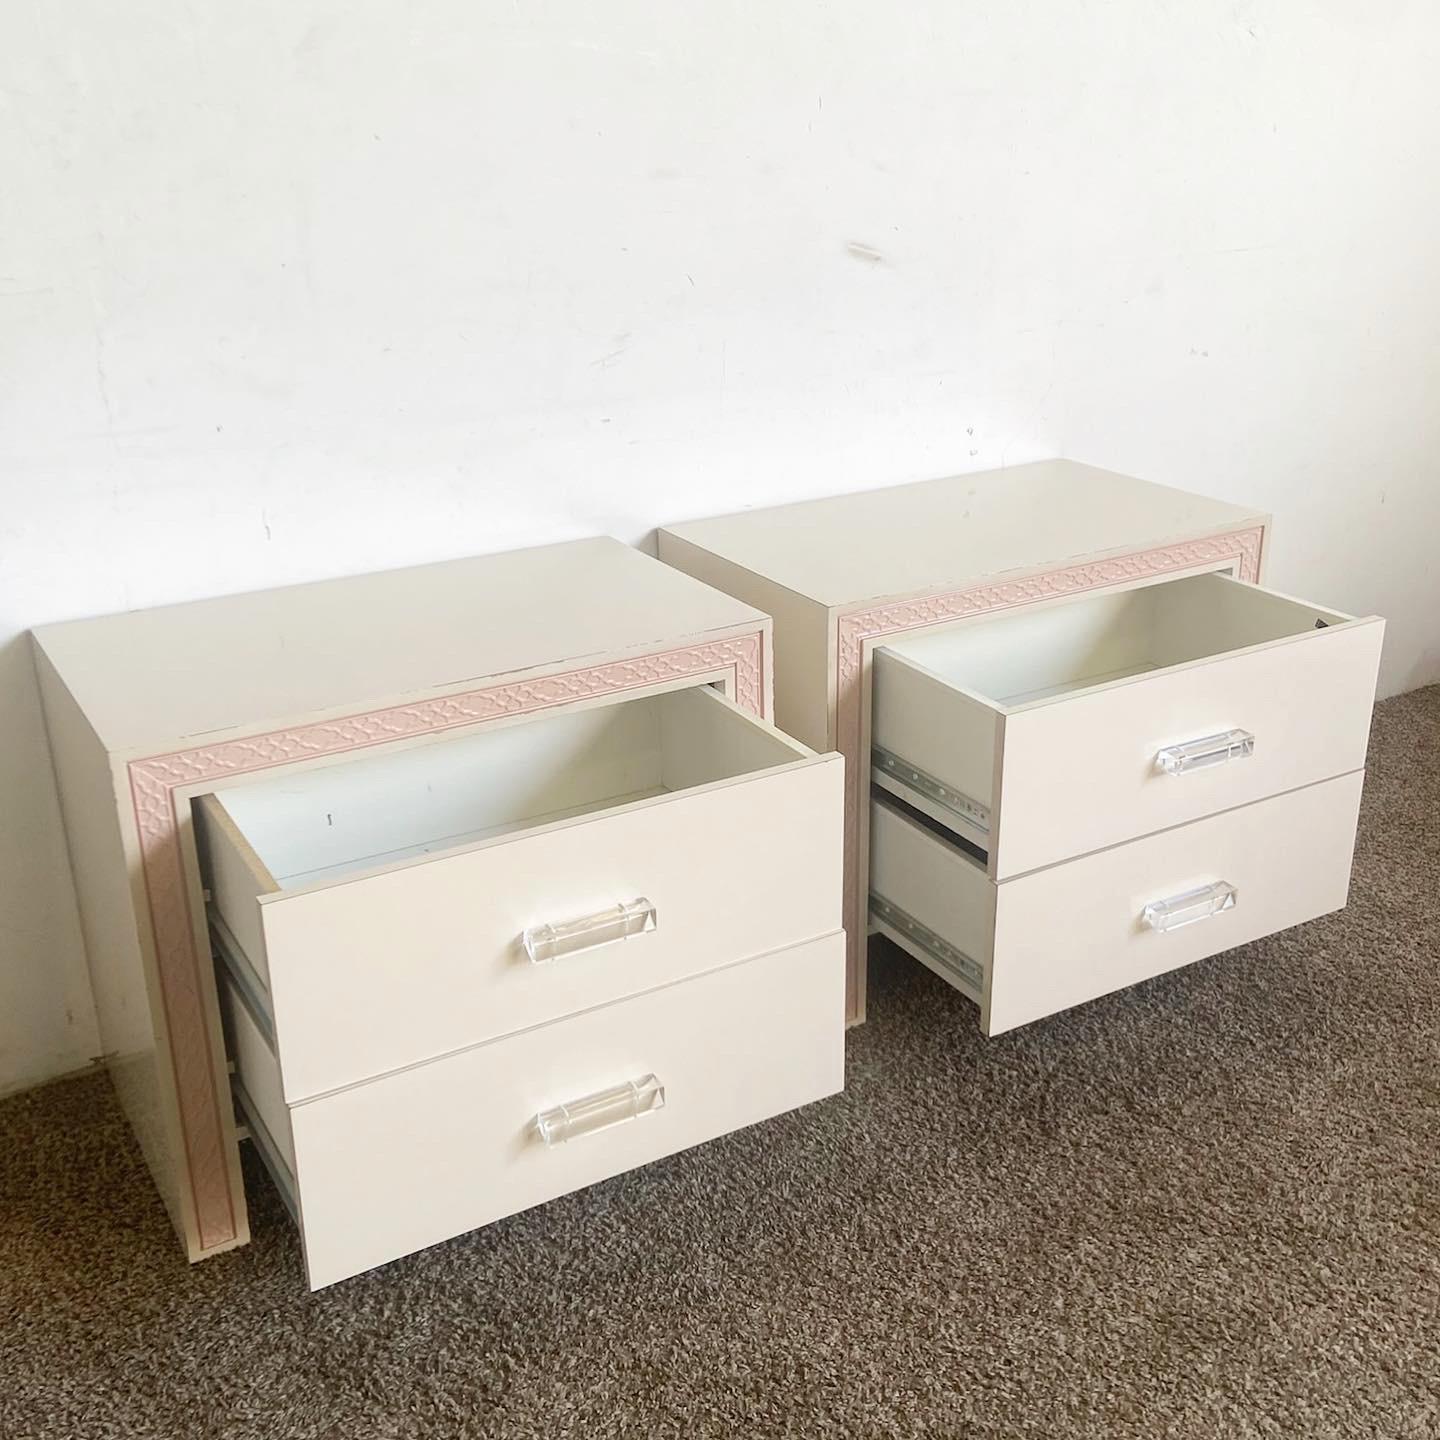 Elevate your bedroom with these Pink Postmodern Nightstands with Lucite handles. A pair, they blend soft pink bodies with crisp white drawer fronts, embodying postmodern charm. The transparent lucite handles introduce a touch of luxury, making these